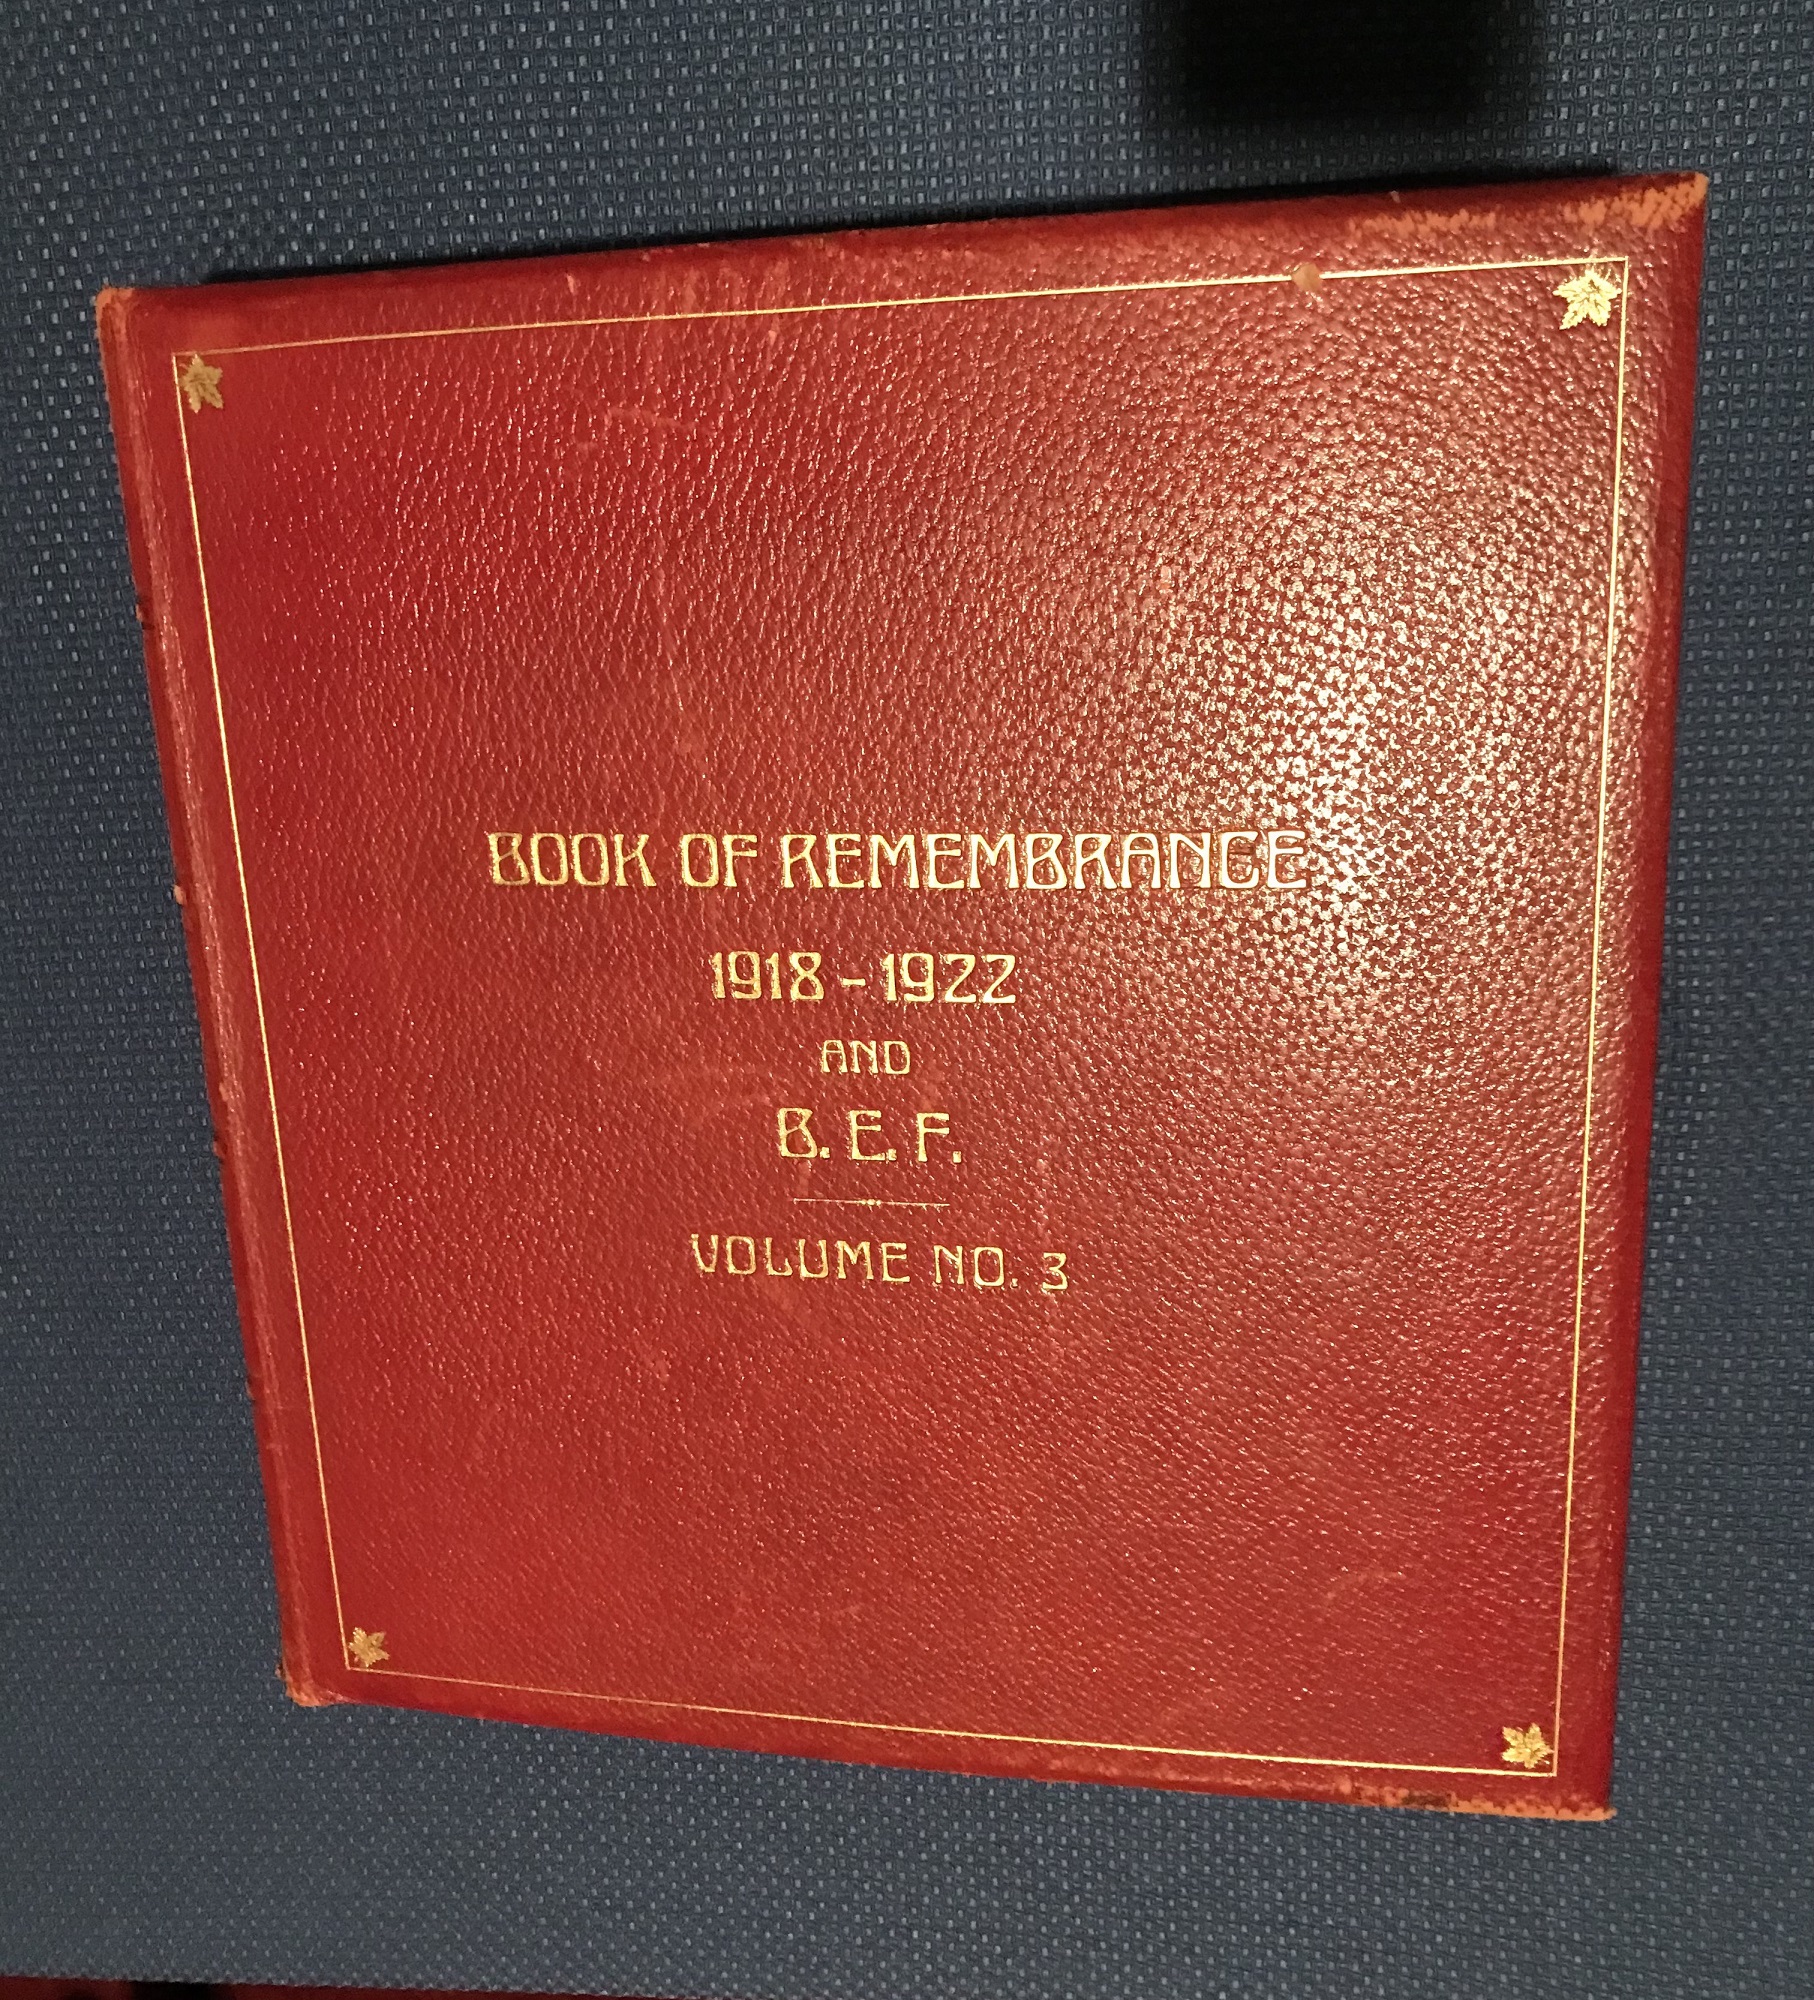 First World War Book of Remembrance, 1918 - 1922